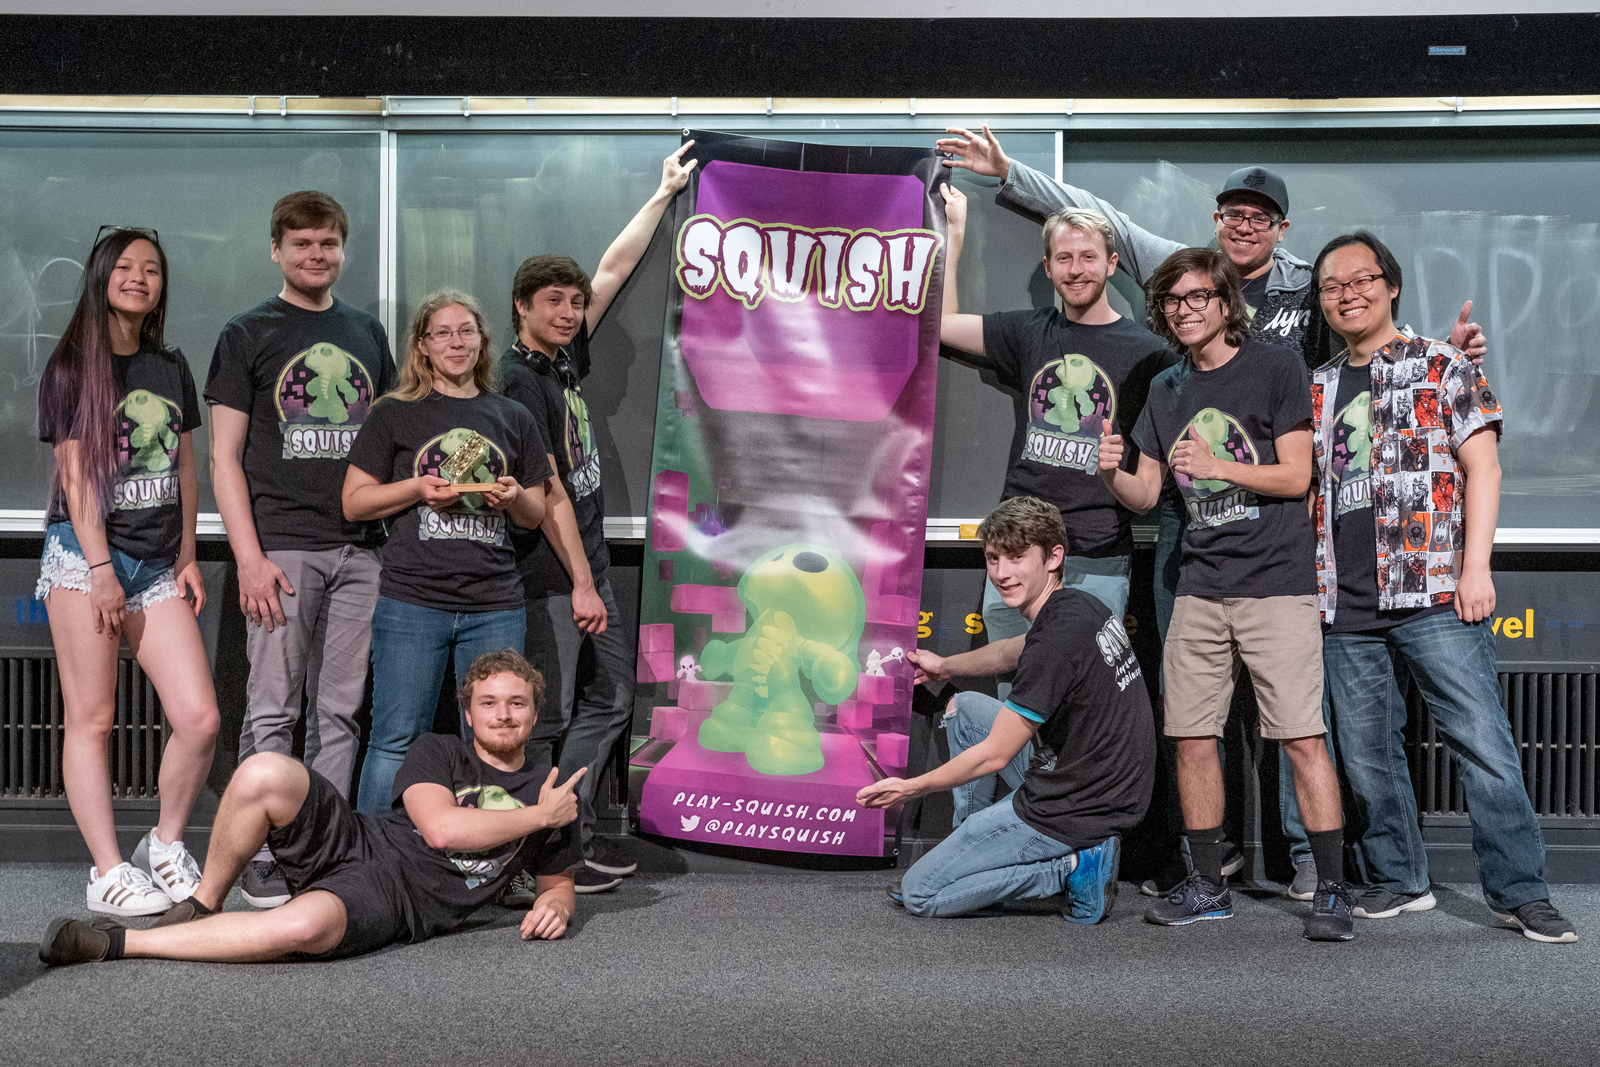 Squish team surrounds a banner that says Squish and shows one of their little green skeleton-like characters